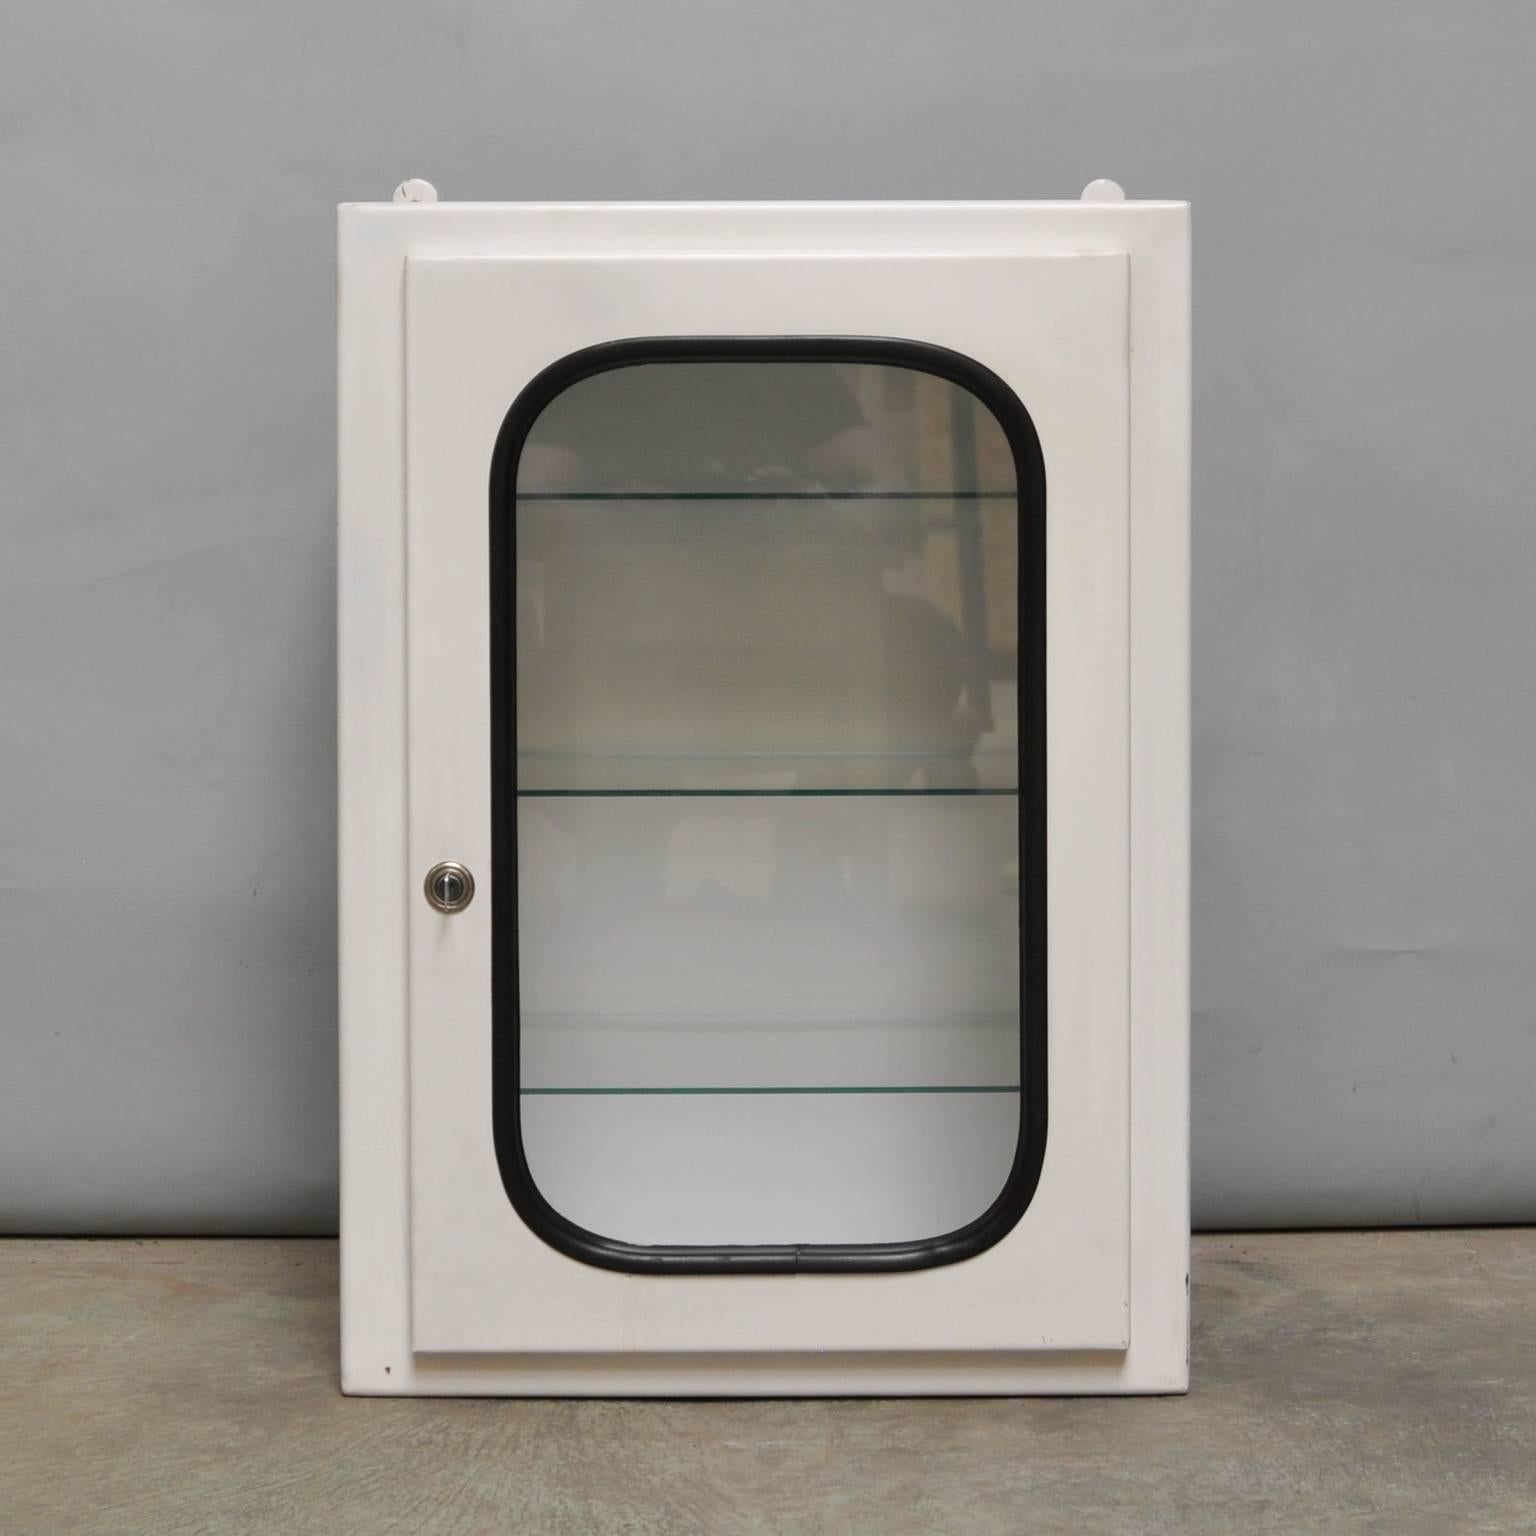 This medicine cabinet was designed in the 1970s and produced circa 1975 in Hungary. It is made of iron and glass. The glass is held by a black rubber strip. The cabinet comes with three adjustable glass shelves and a functioning lock.